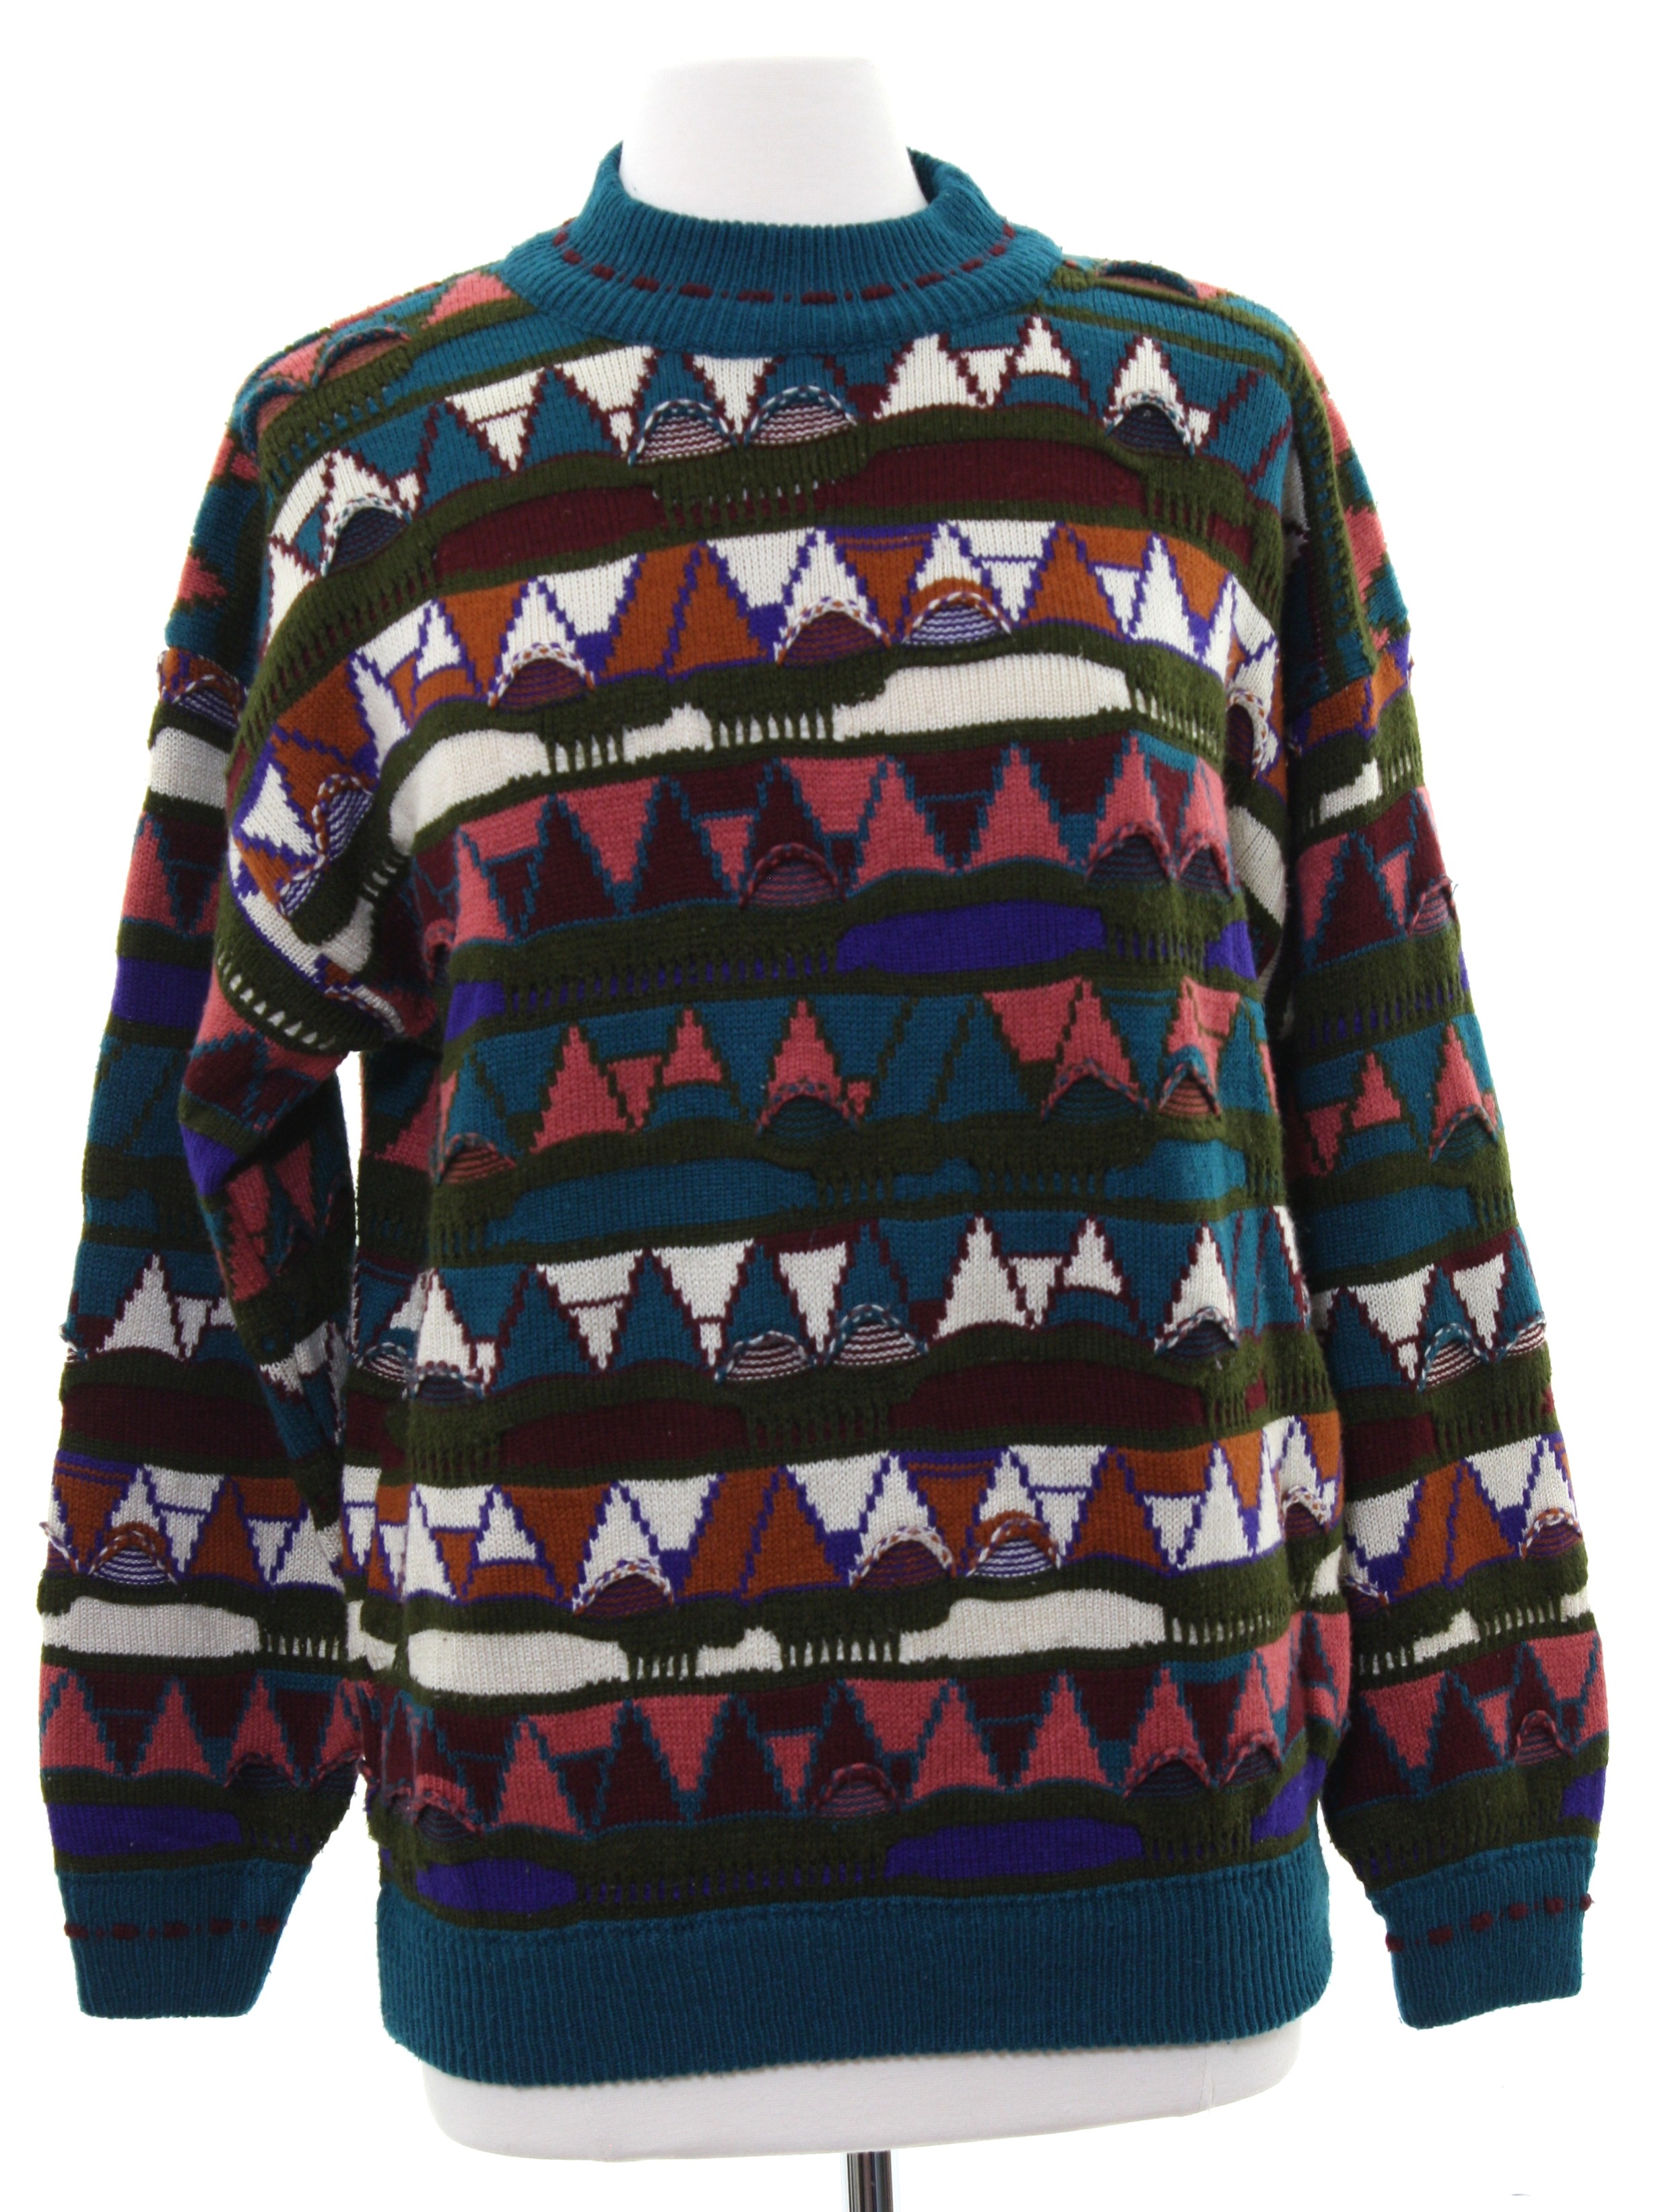 Ivy Eighties Vintage Sweater: 80s -Ivy- Womens teal background acrylic ...